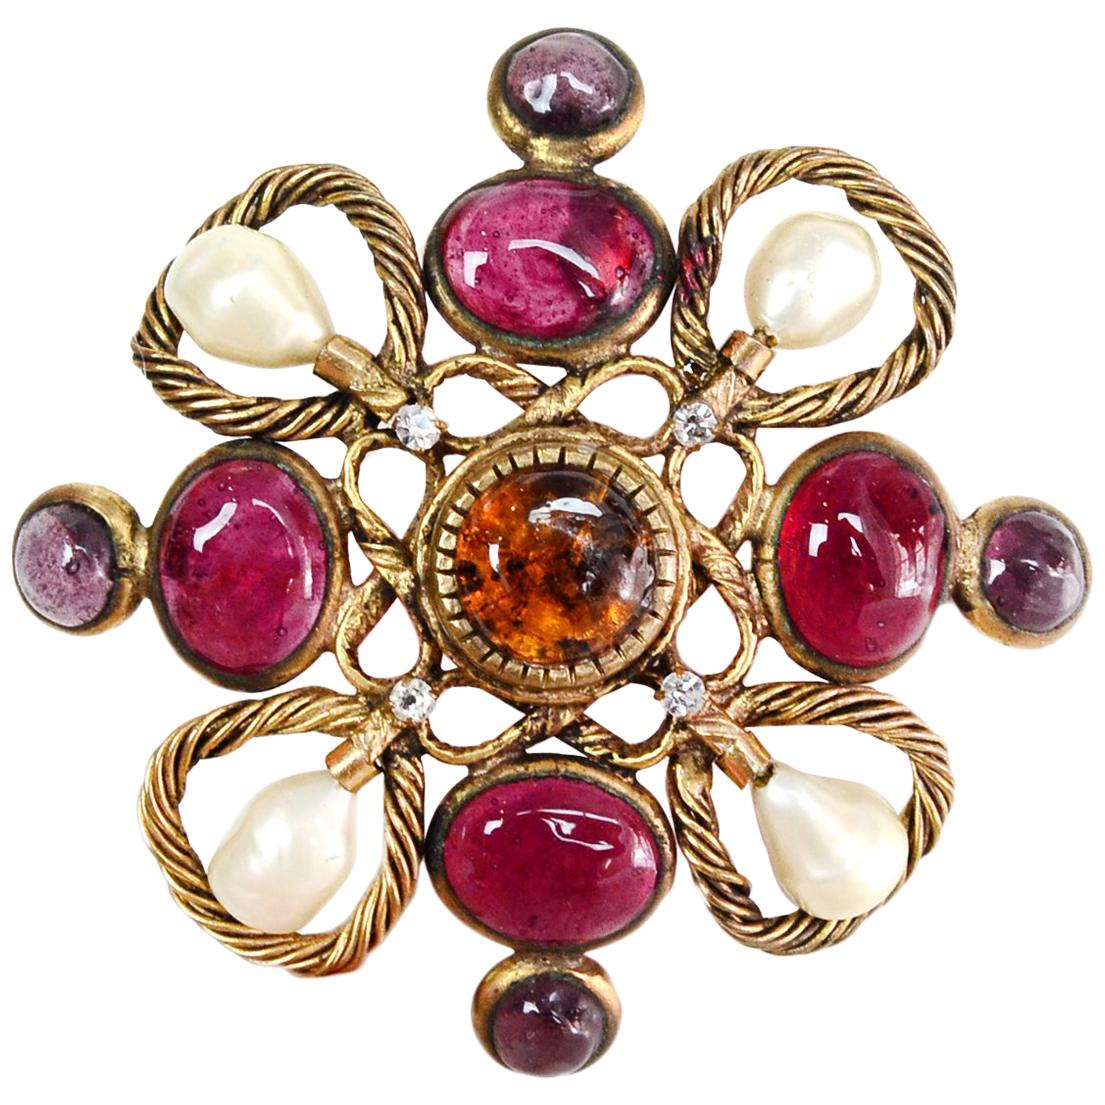 Chanel Vintage Faux Pearls & Amber/Pink/Amethyst Gripoix Brooch Pin